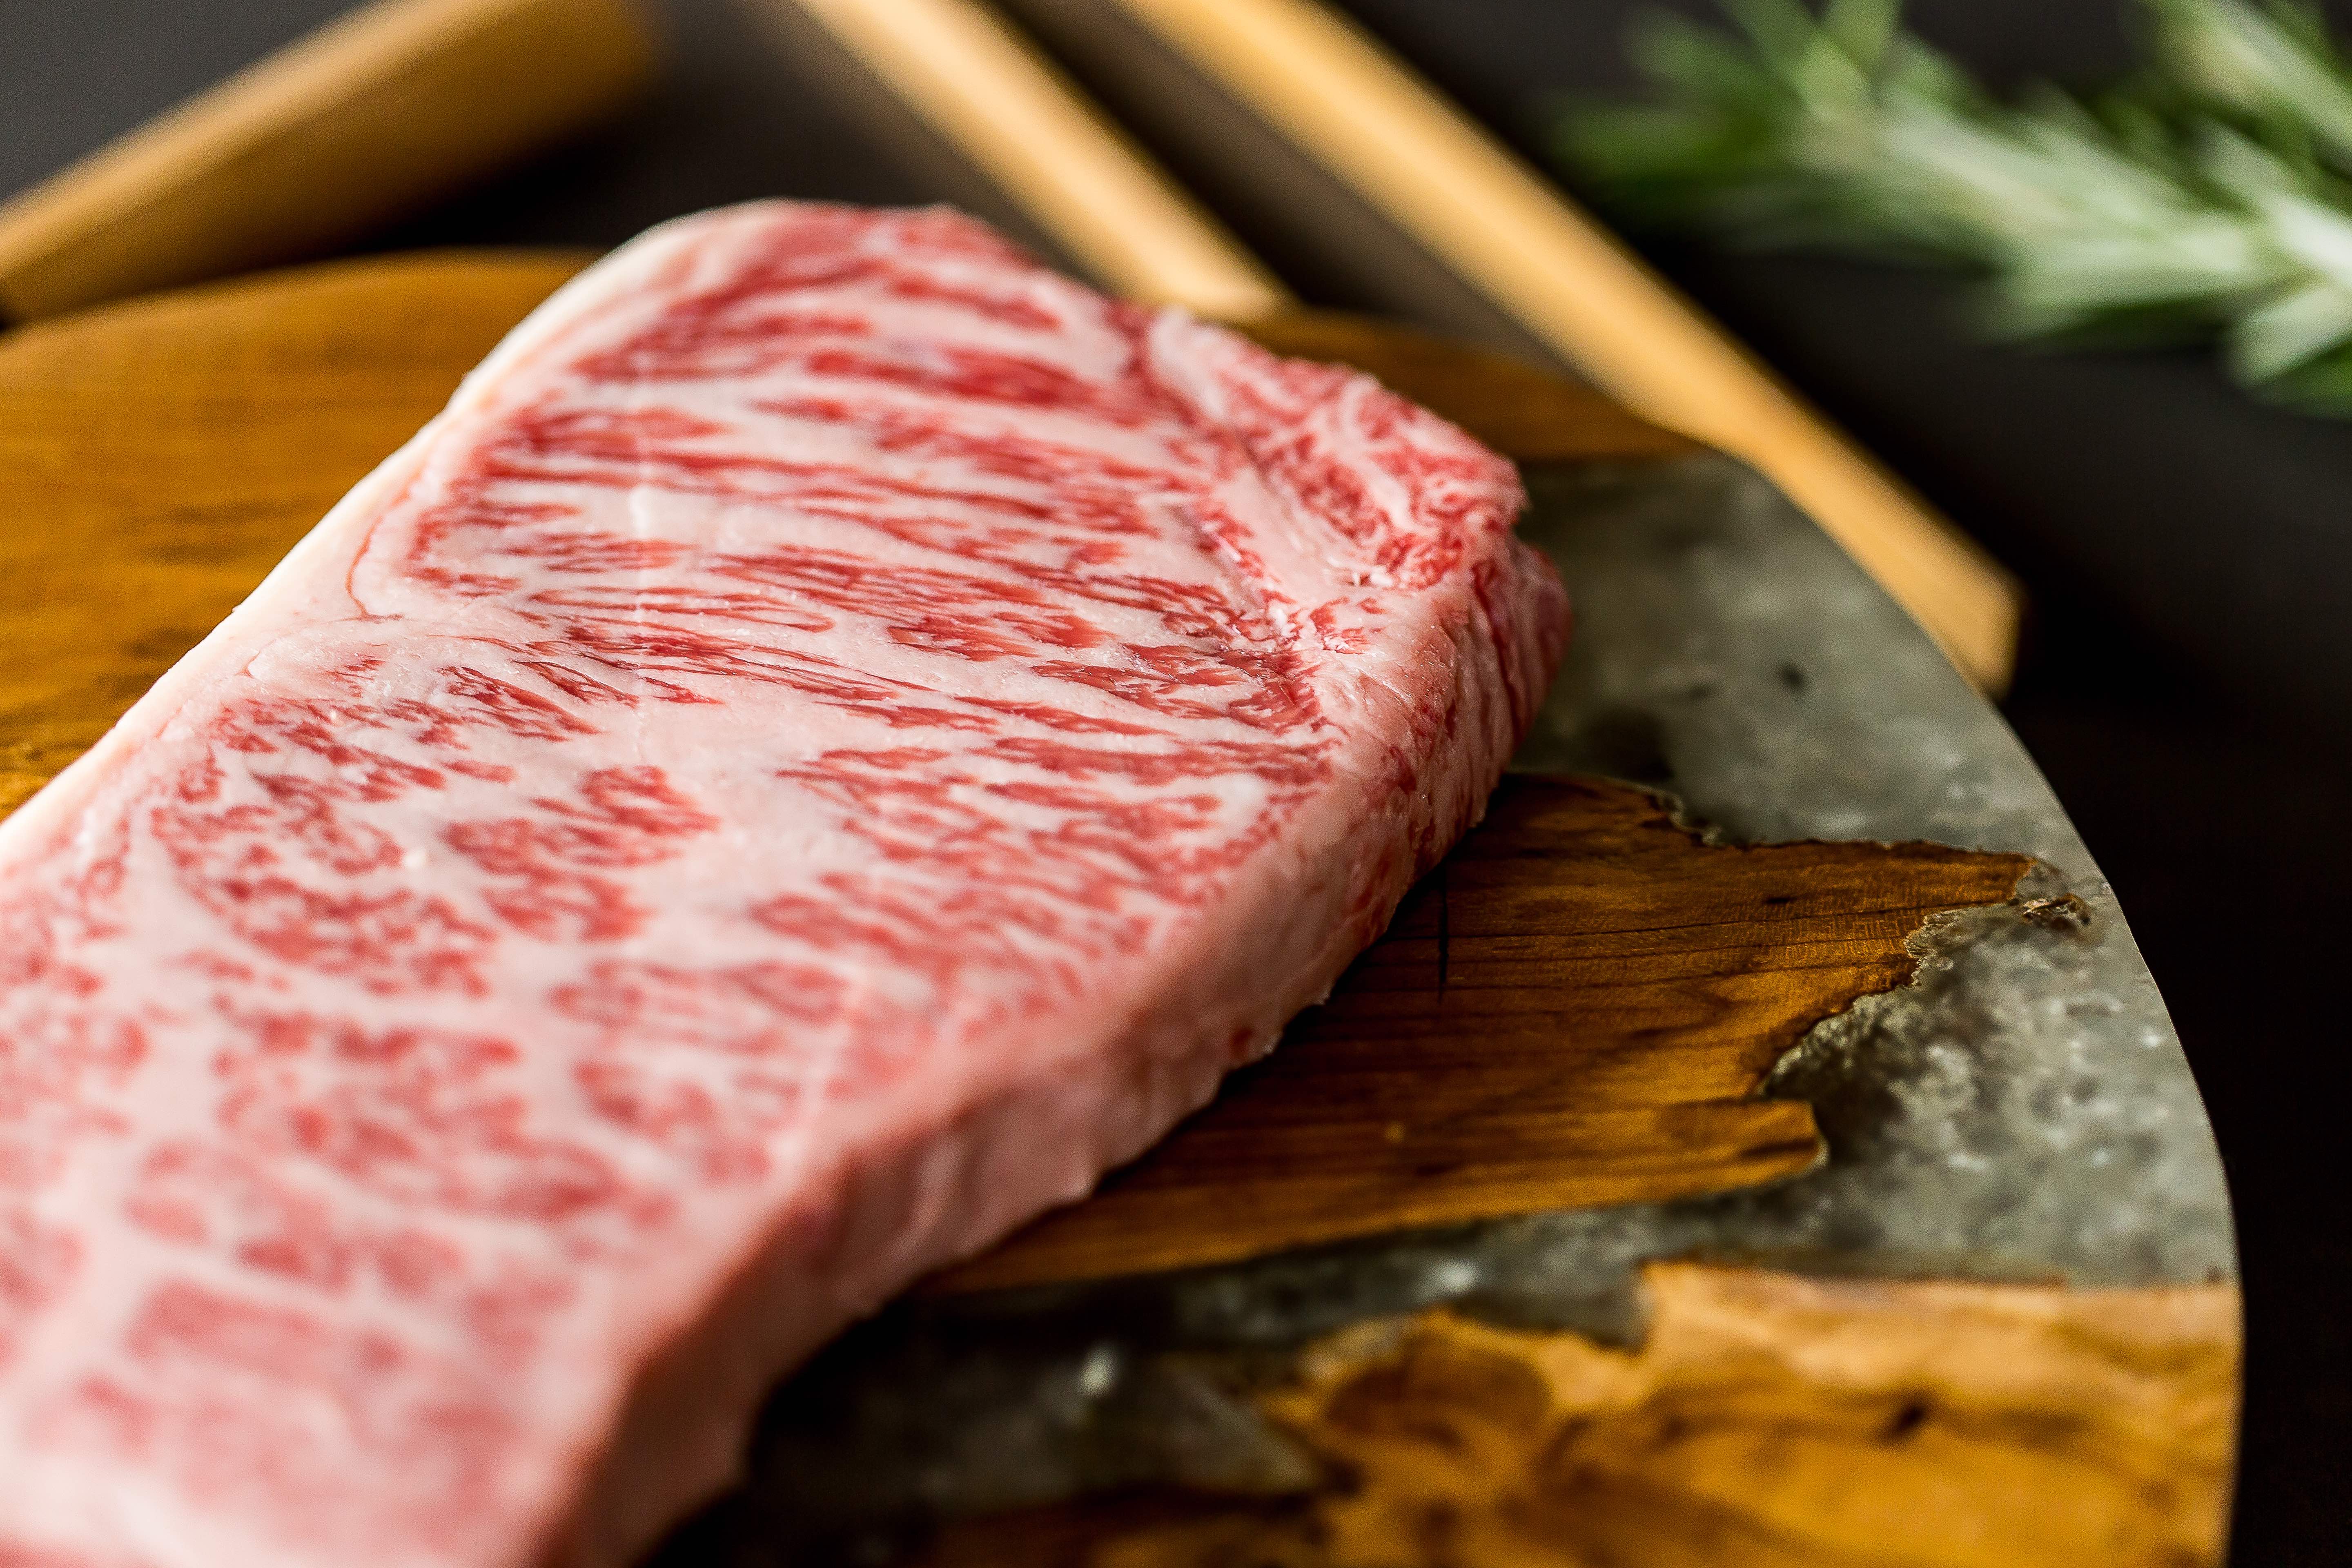 Crowd Cow “Cow Sharing” marketplace offering Japanese A5 Wagyu